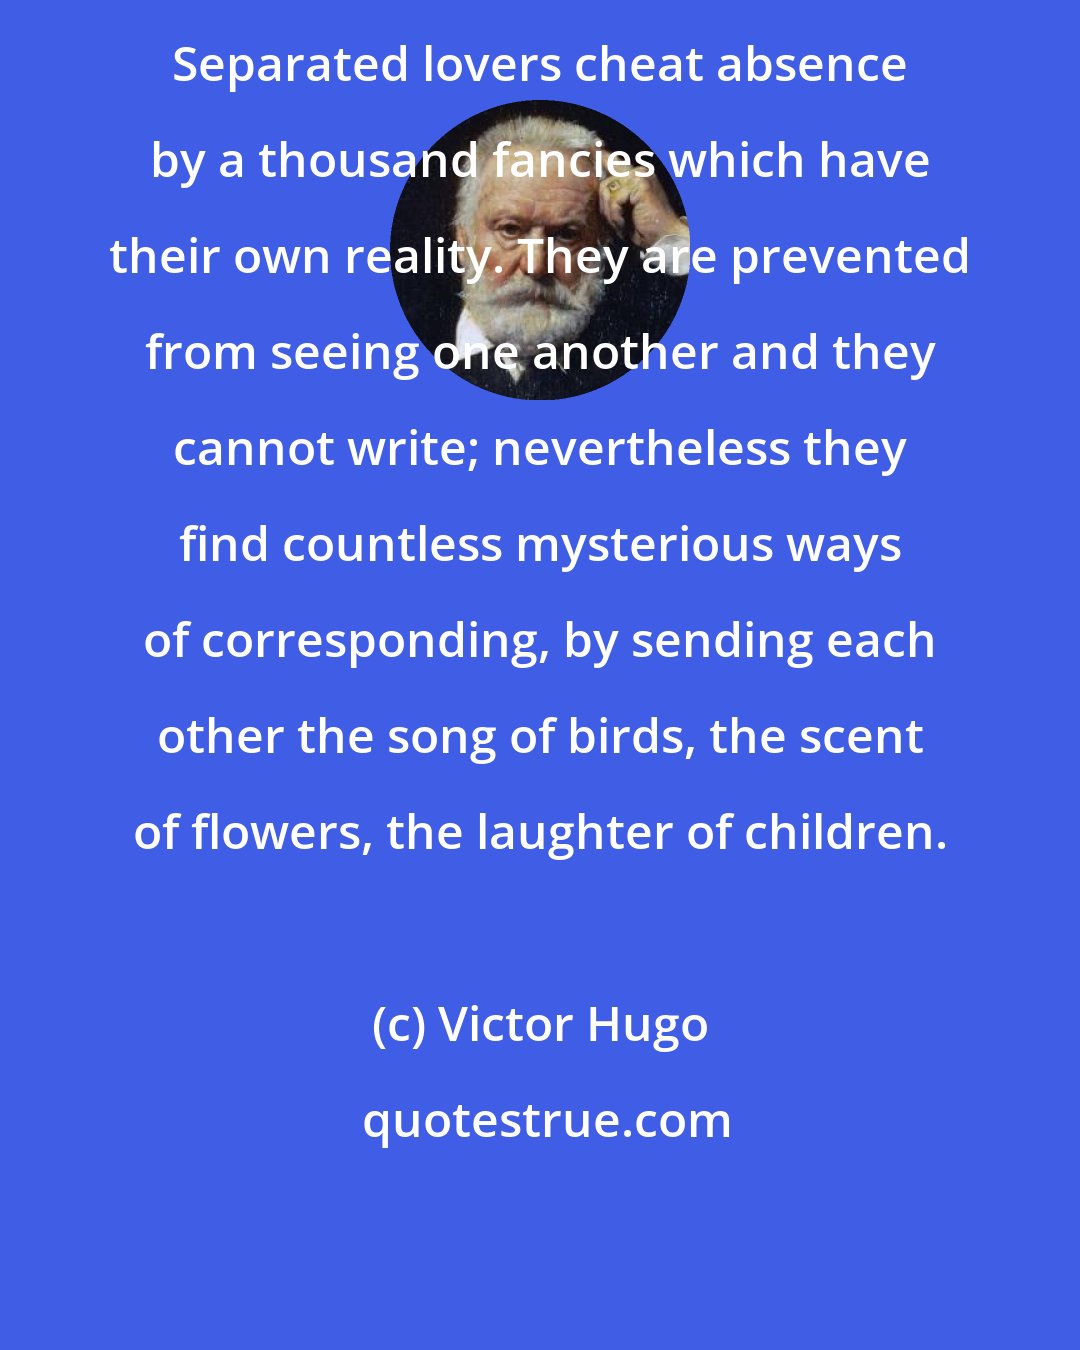 Victor Hugo: Separated lovers cheat absence by a thousand fancies which have their own reality. They are prevented from seeing one another and they cannot write; nevertheless they find countless mysterious ways of corresponding, by sending each other the song of birds, the scent of flowers, the laughter of children.